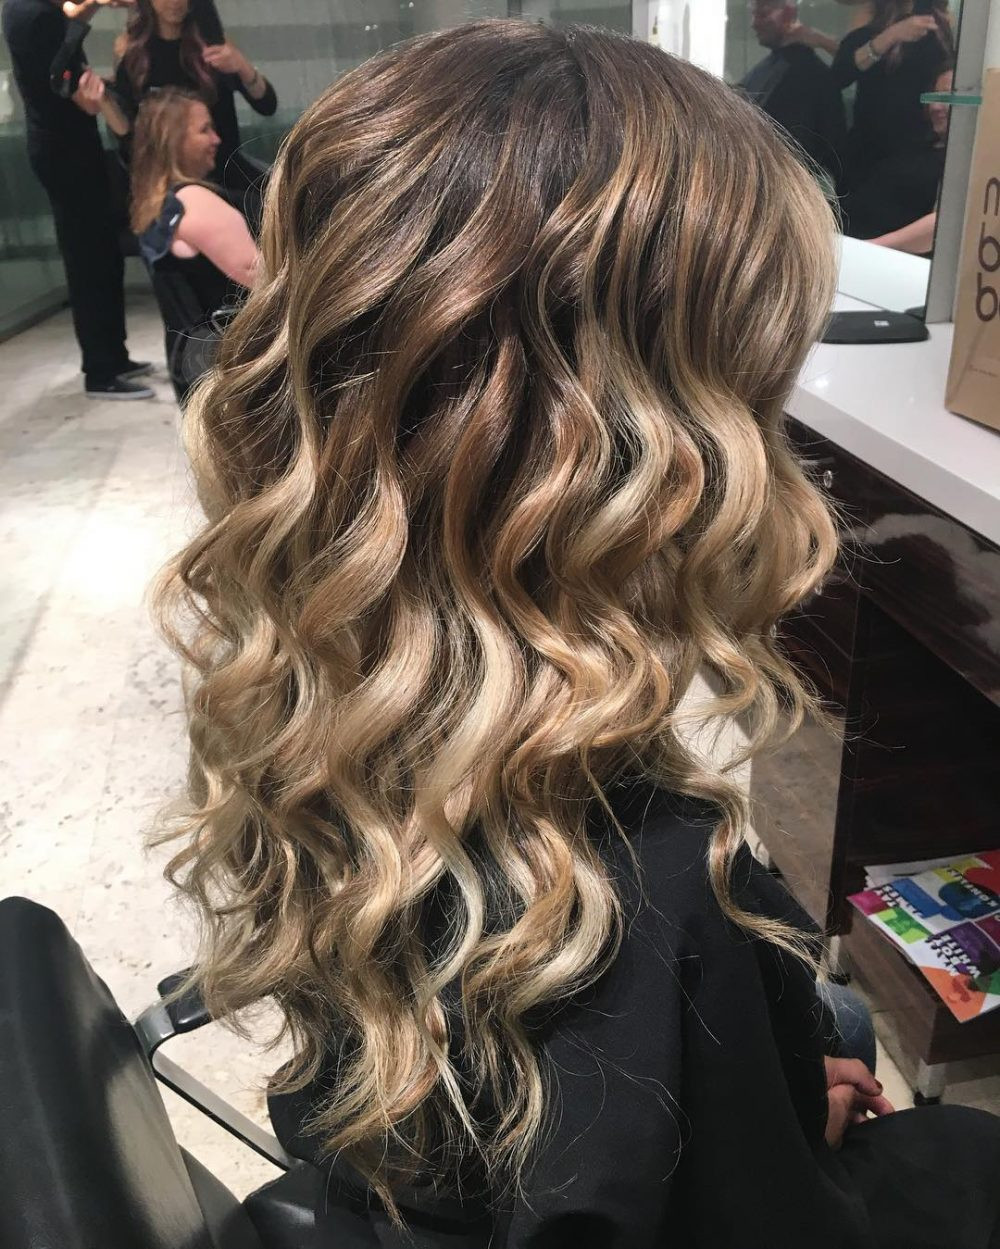 Wavy Prom Hairstyle
 18 Stunning Curly Prom Hairstyles for 2019 Updos Down